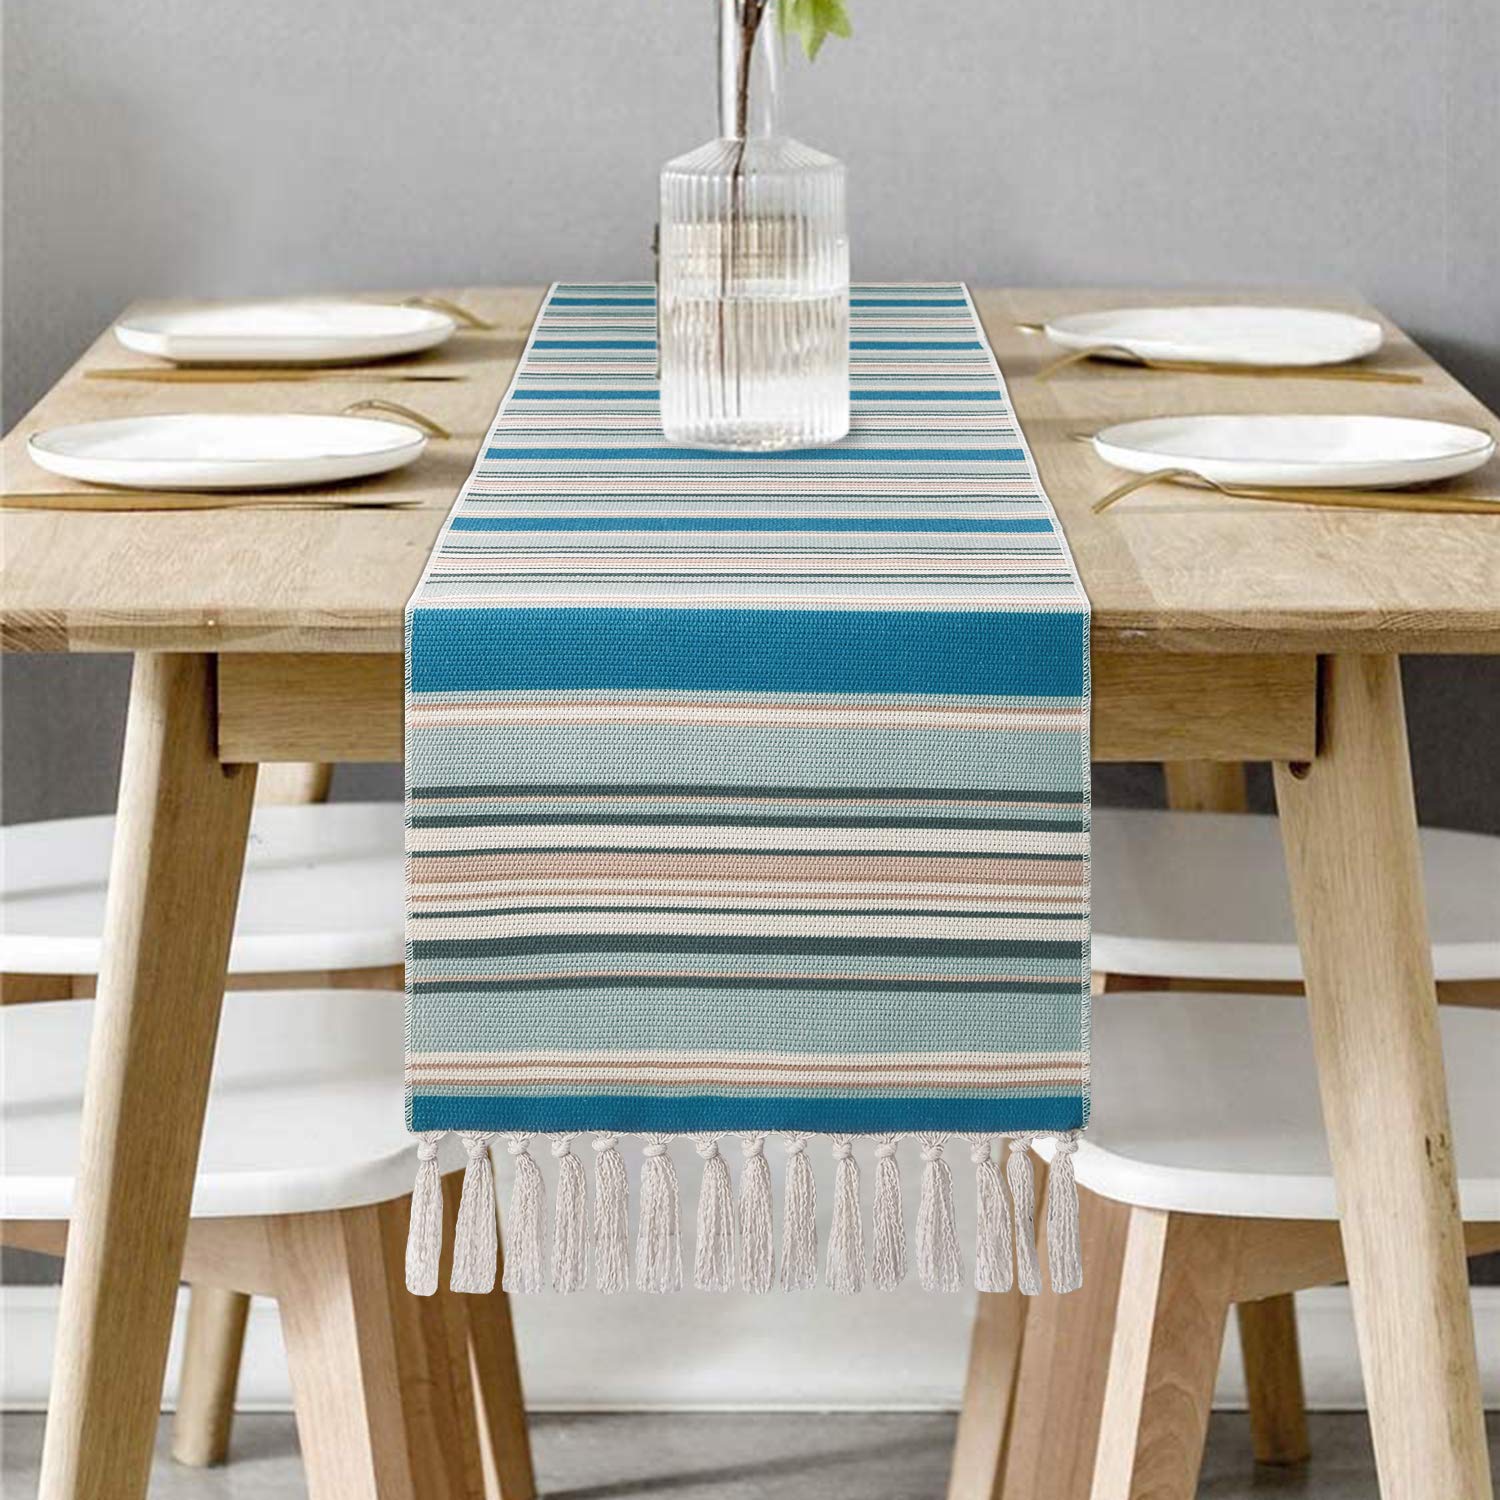 Yugarlibi Blue Seaside Table Runner, Teal Striped Non-Slip Heat-Resistant Tablecloth for Dining Table Party Banquet Wedding 70x14 Inches (180x35cm)